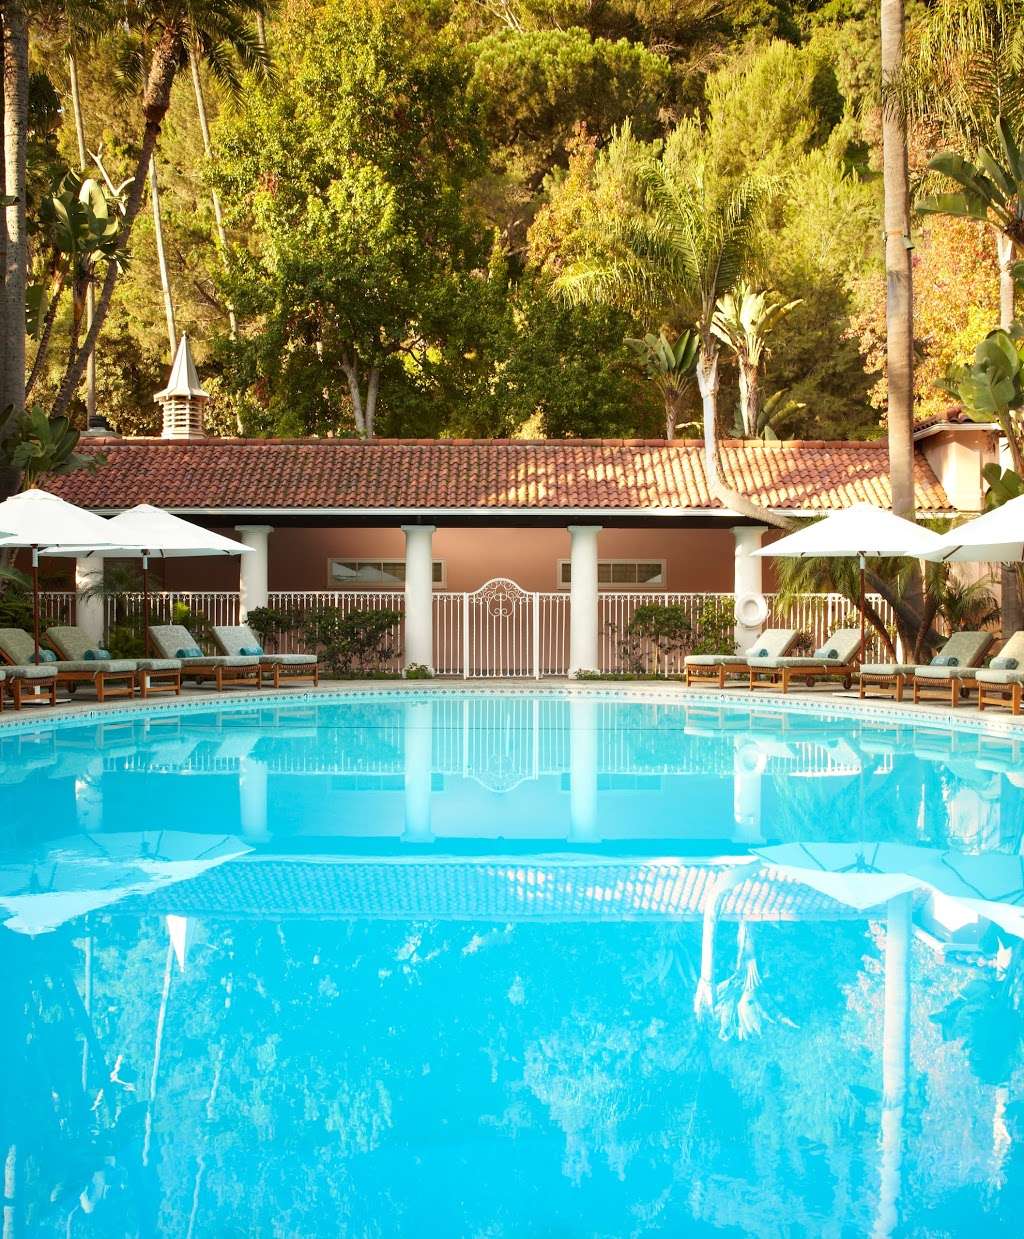 Hotel Bel-Air | 701 Stone Canyon Rd, Los Angeles, CA 90077 | Phone: (310) 472-1211